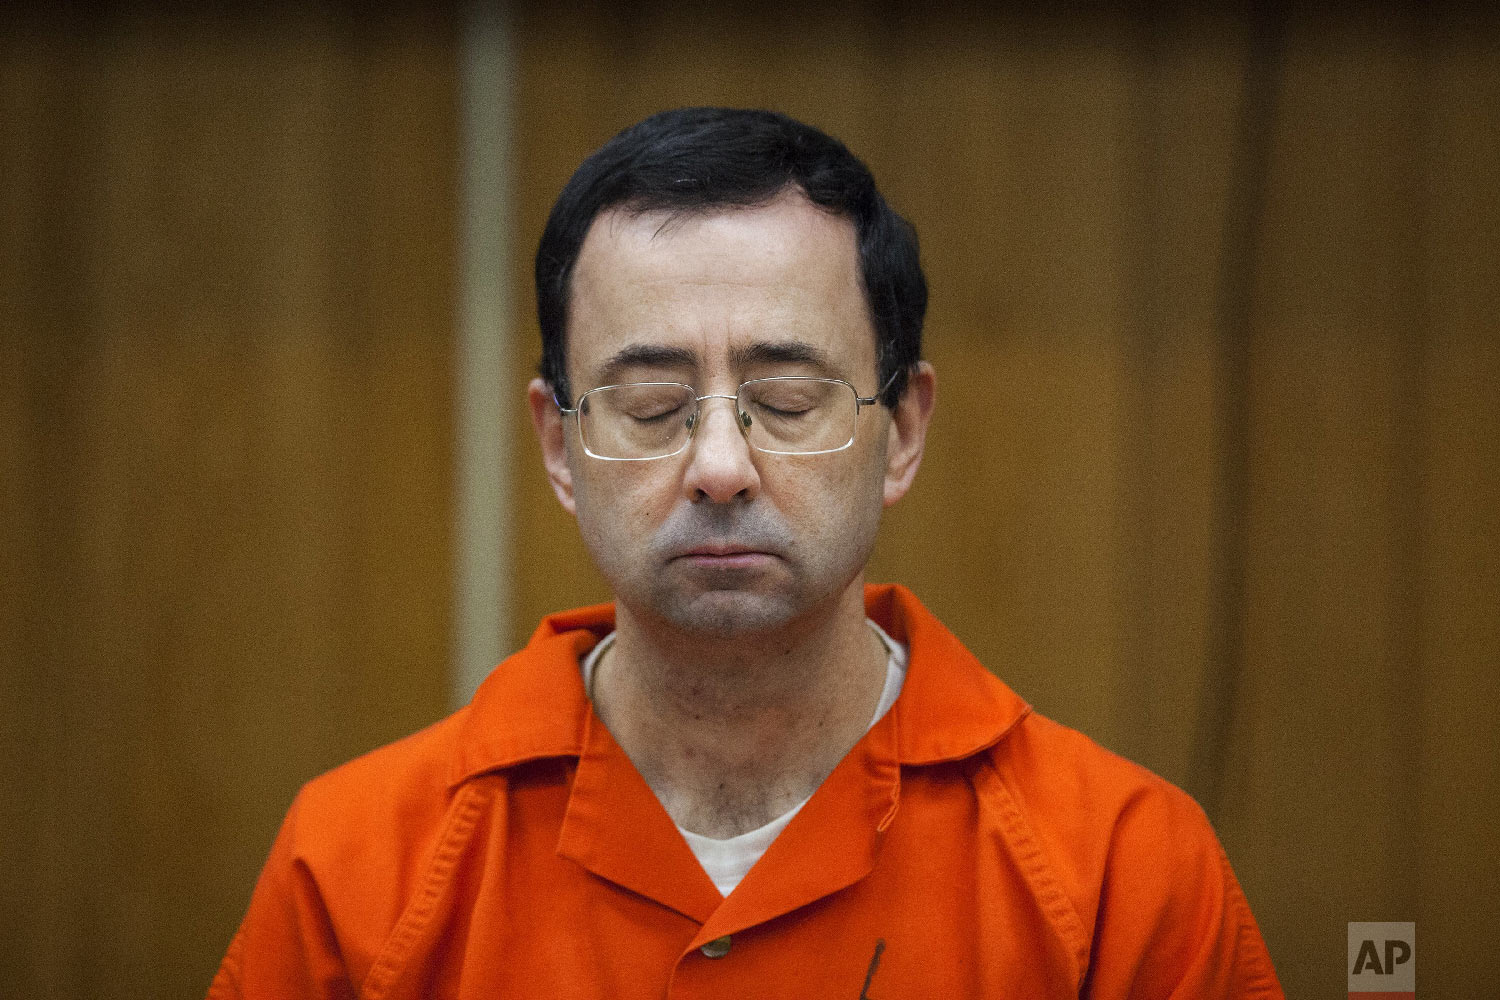  Larry Nassar listens during his sentencing at Eaton County Circuit Court in Charlotte, Mich., on Feb. 5, 2018. The former doctor for Michigan State University sports-medicine and USA Gymnastics received 40 to 125 years for three first degree crimina